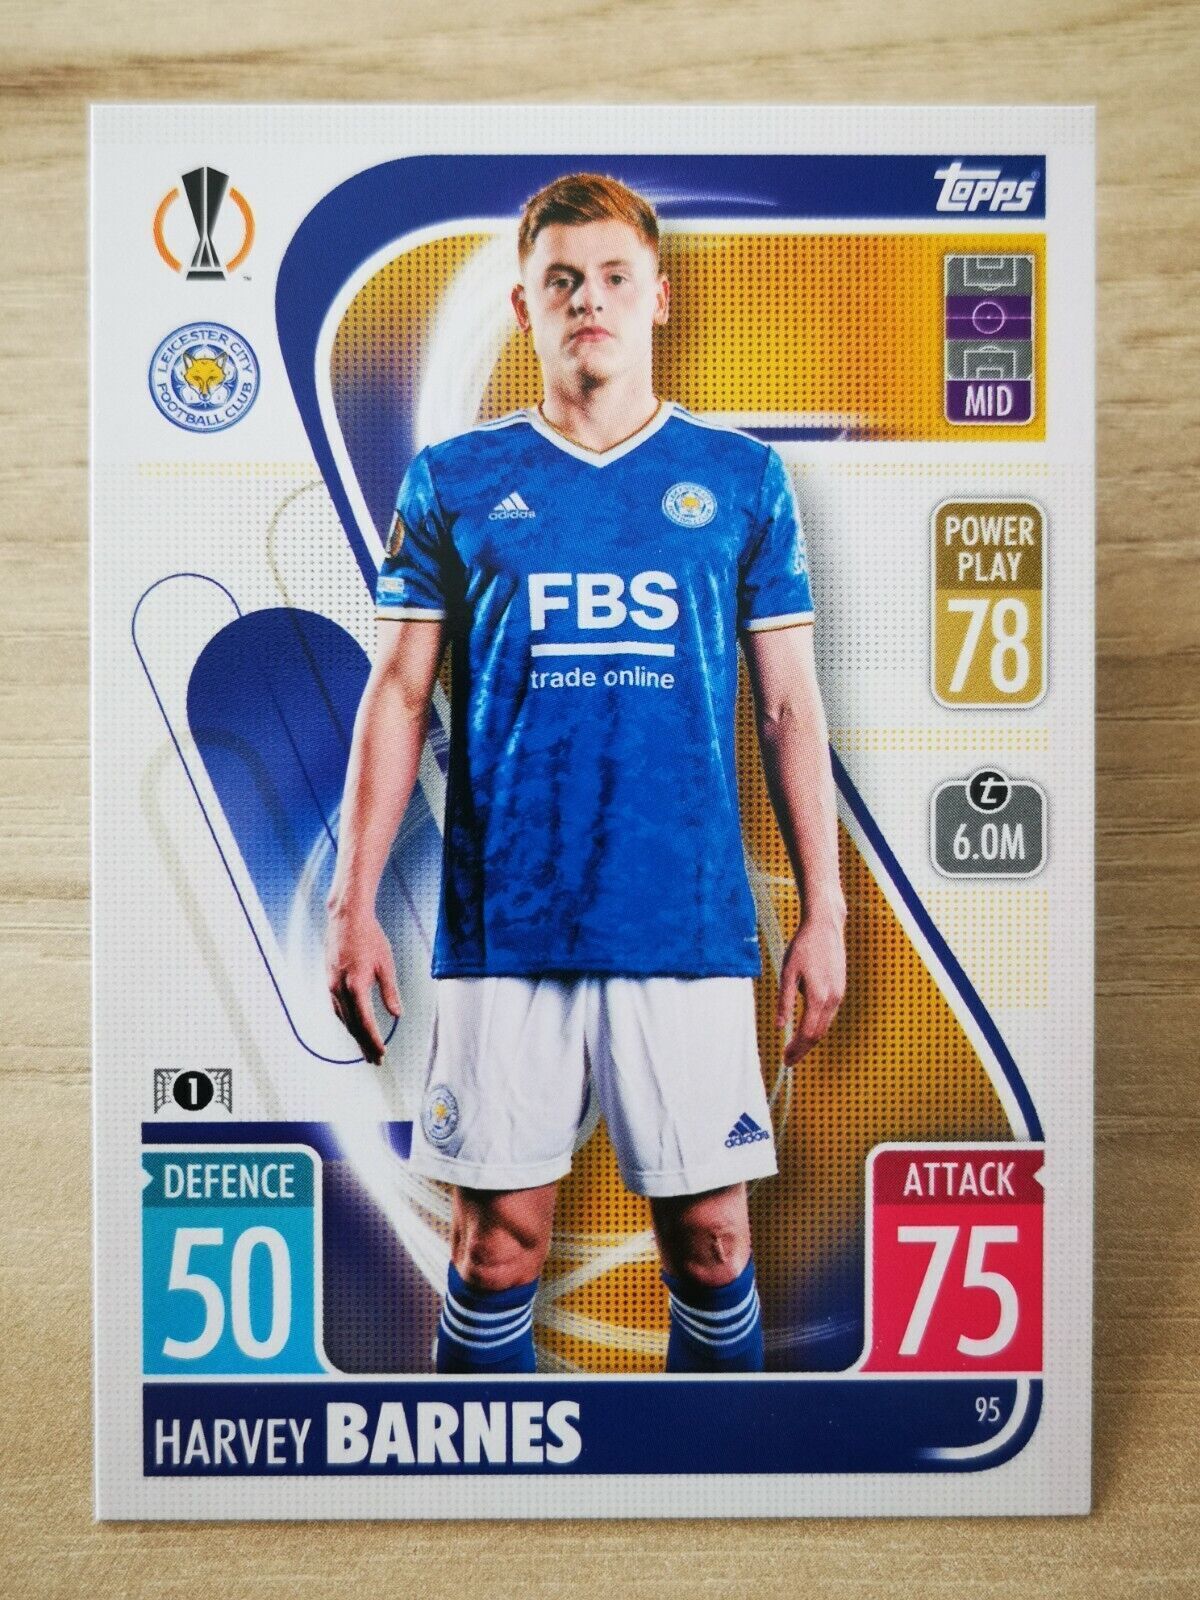 Topps C73 match attax 2021-22 champions league #95 Harvey Barnes - Leicester